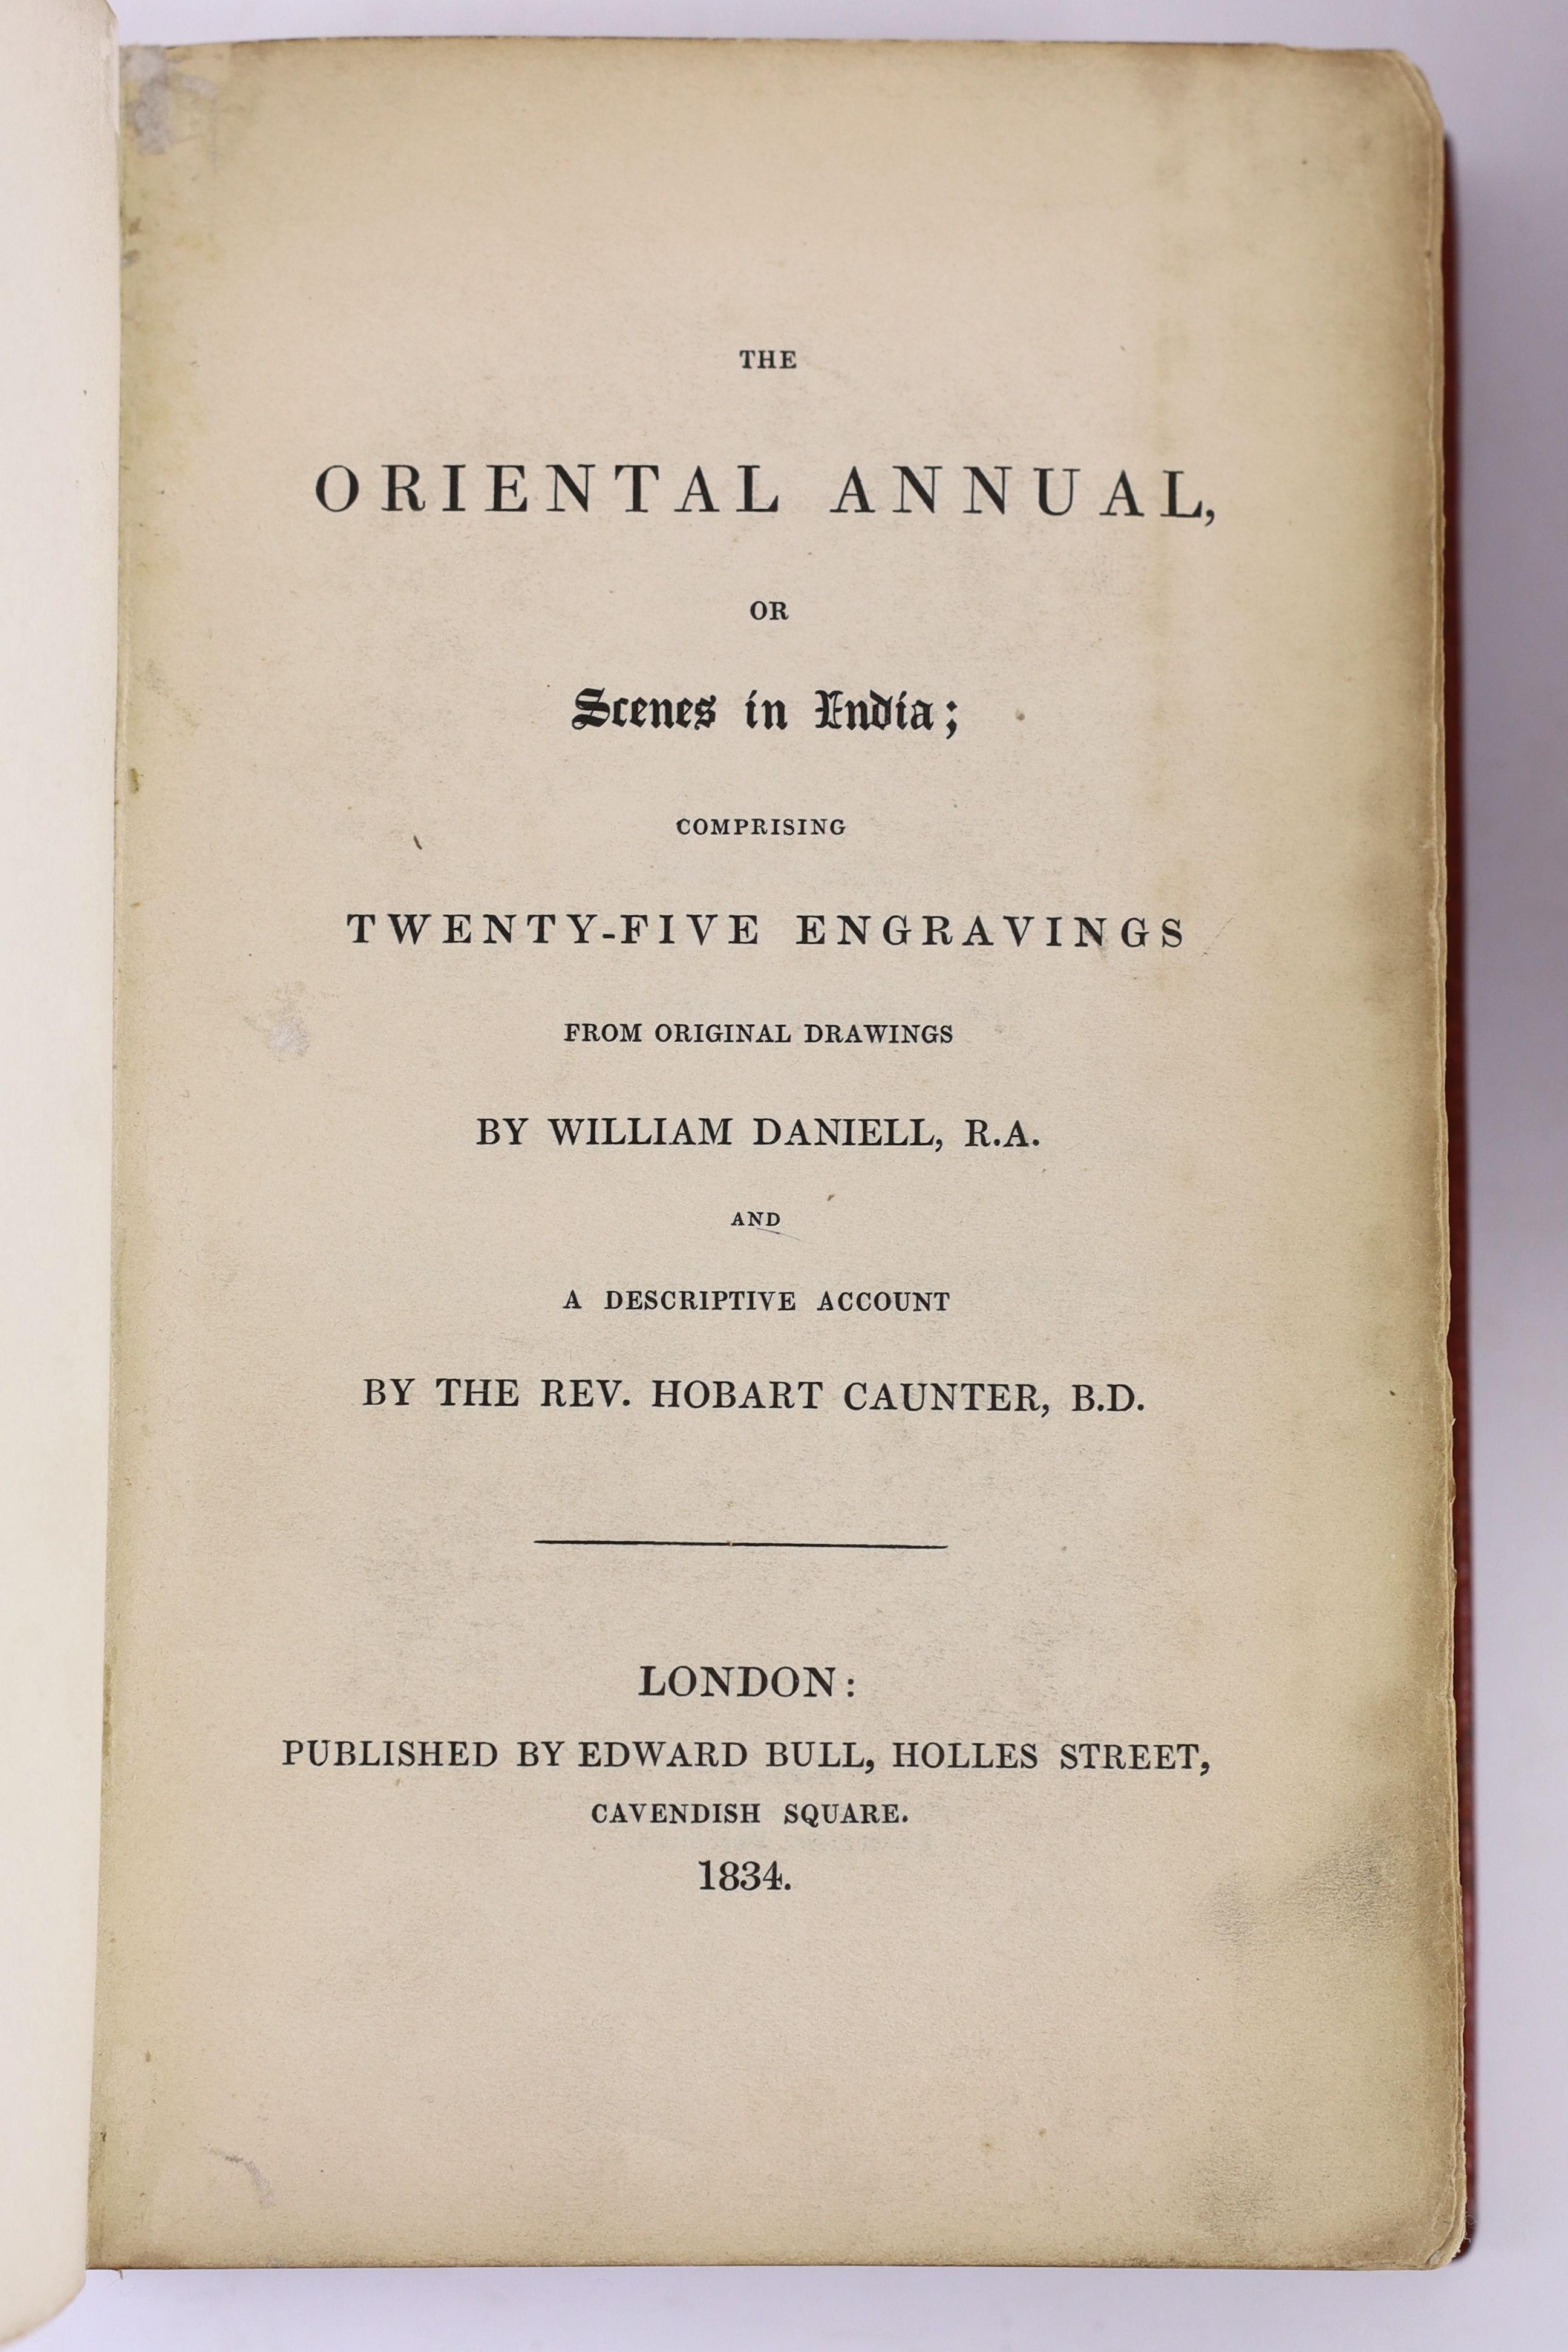 Oriental - The Oriental Annual, or Scenes in India, vol. 1 only (of 7), with engravings after William Daniell, 8vo, rebound red crushed morocco by Book Ends, Edward Ball, London, 1834; Jesse, John Heneage - Memoirs of th